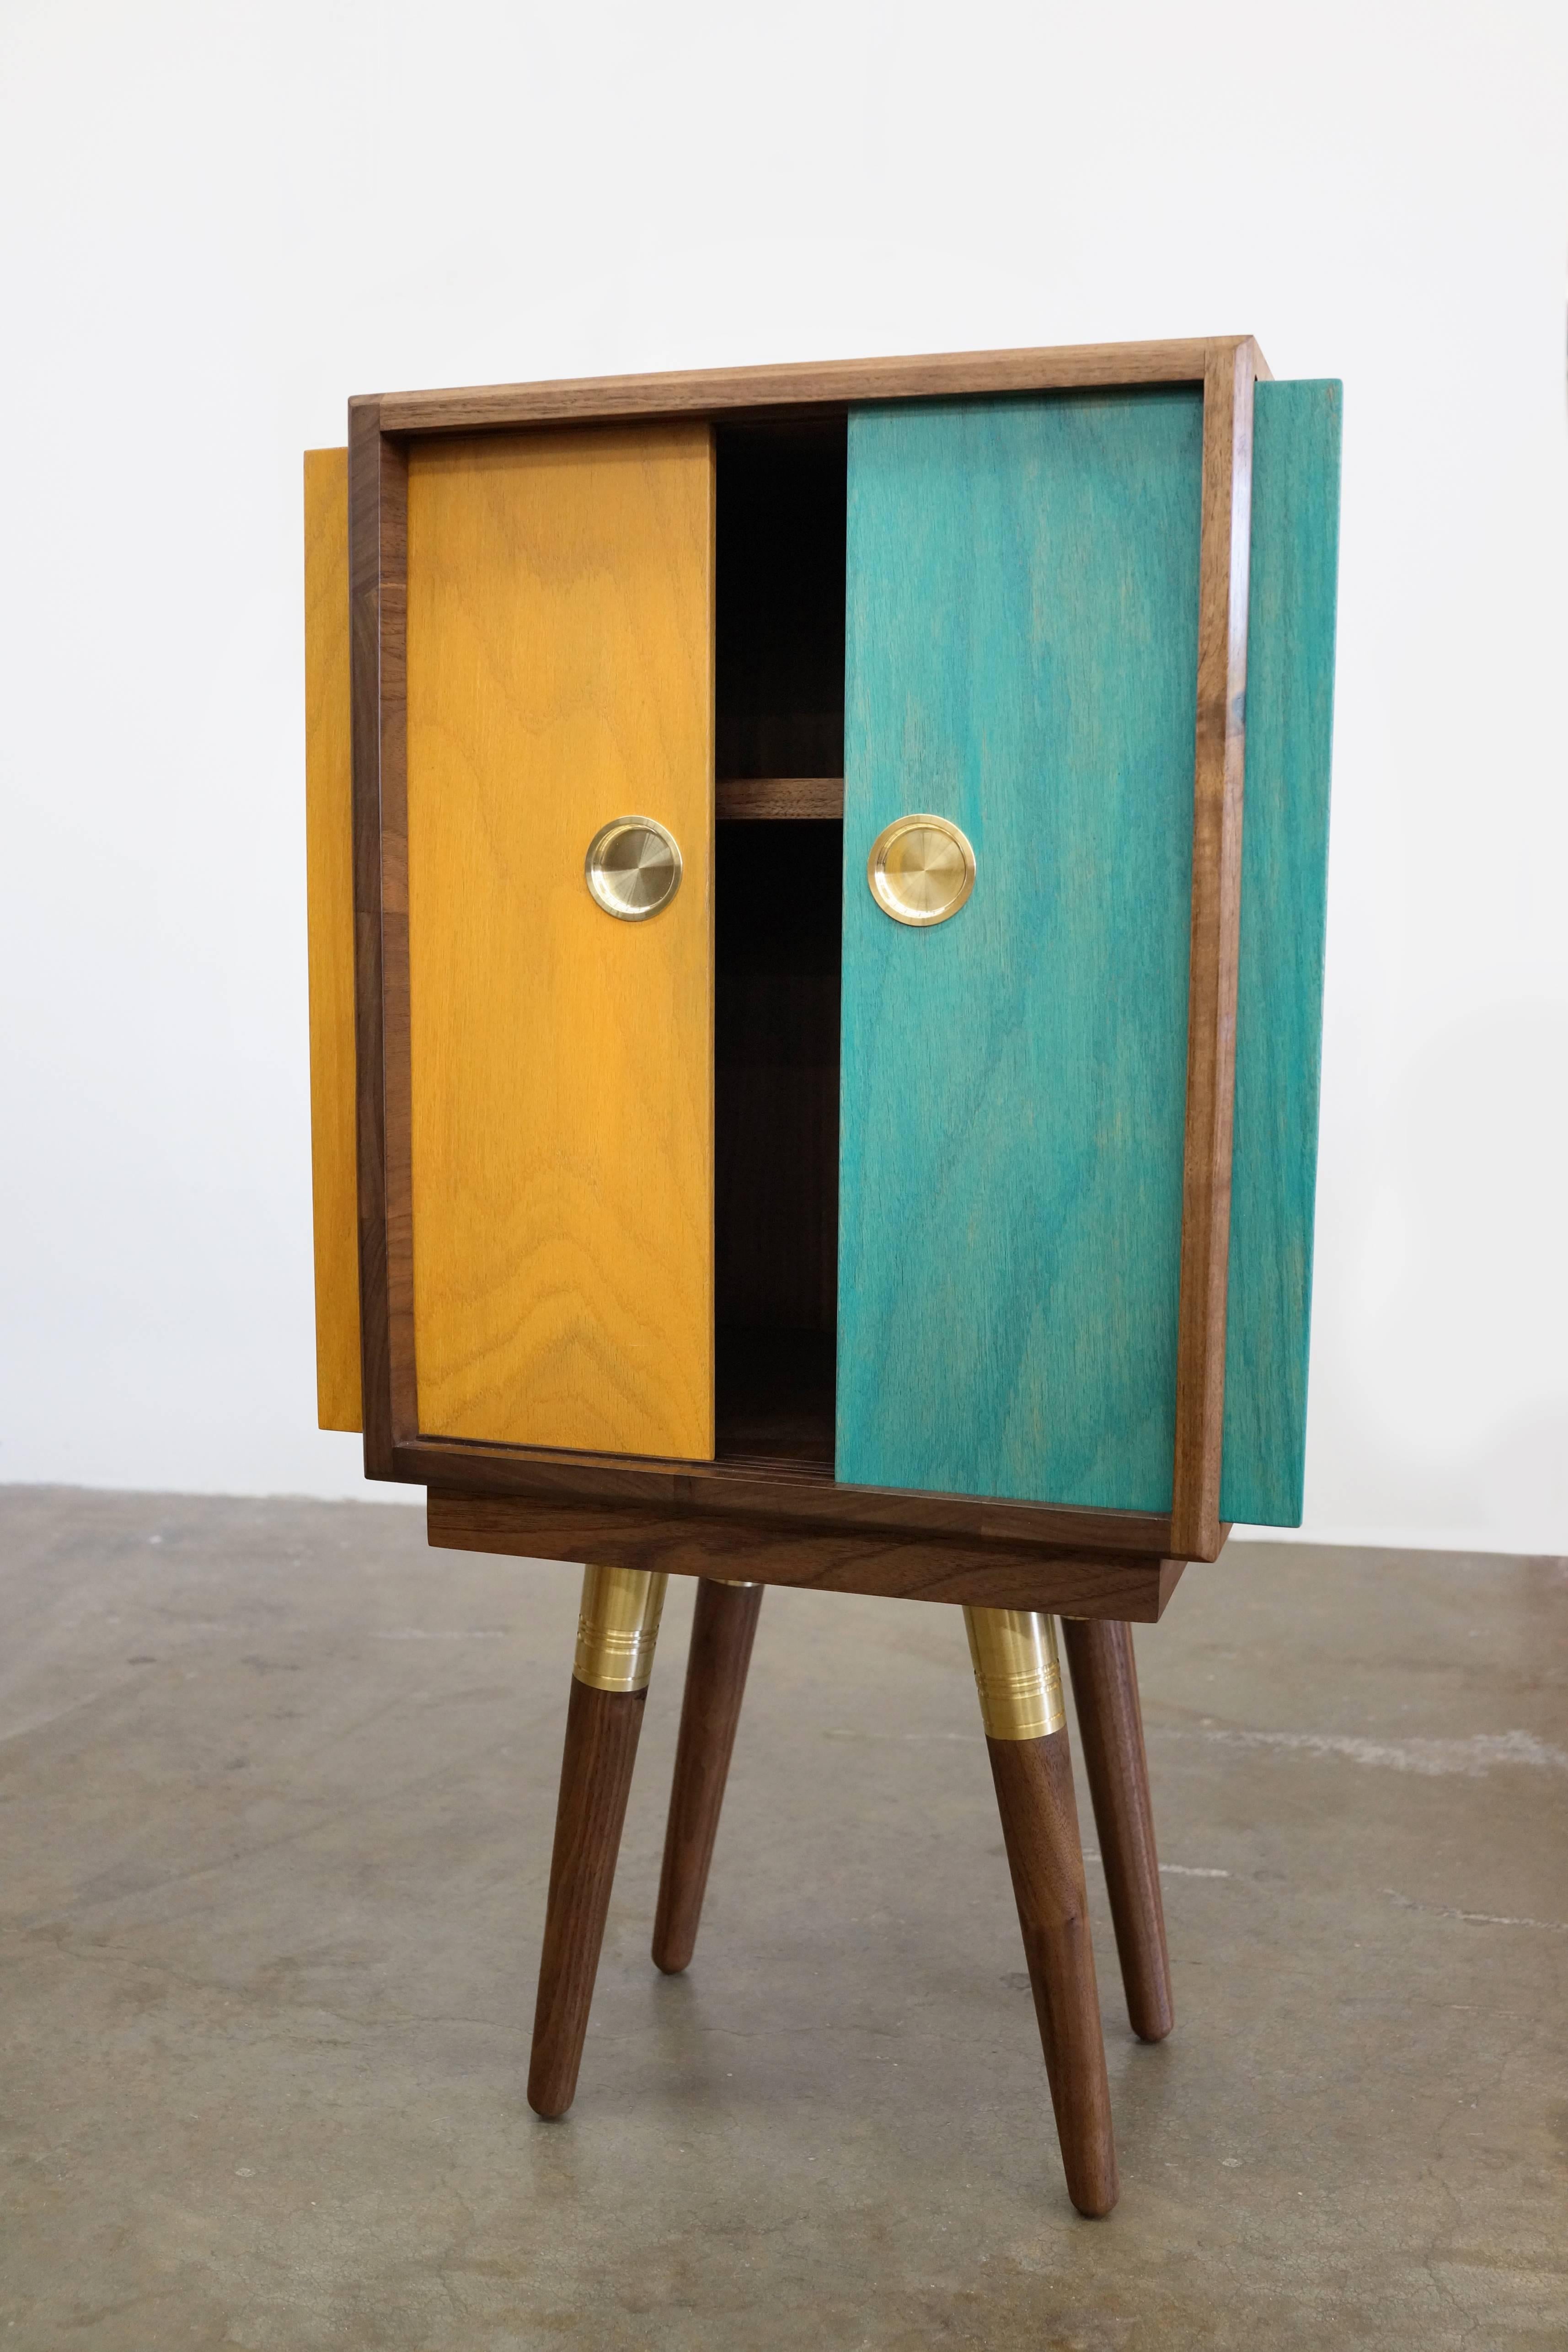 Beaker is our petite cabinet, ready to house your favorite things. While diminutive in size, Beaker is huge in character. Brightly colored sliding doors are hand-painted and inlaid with custom brass finger pulls. 

We think Beaker will make a